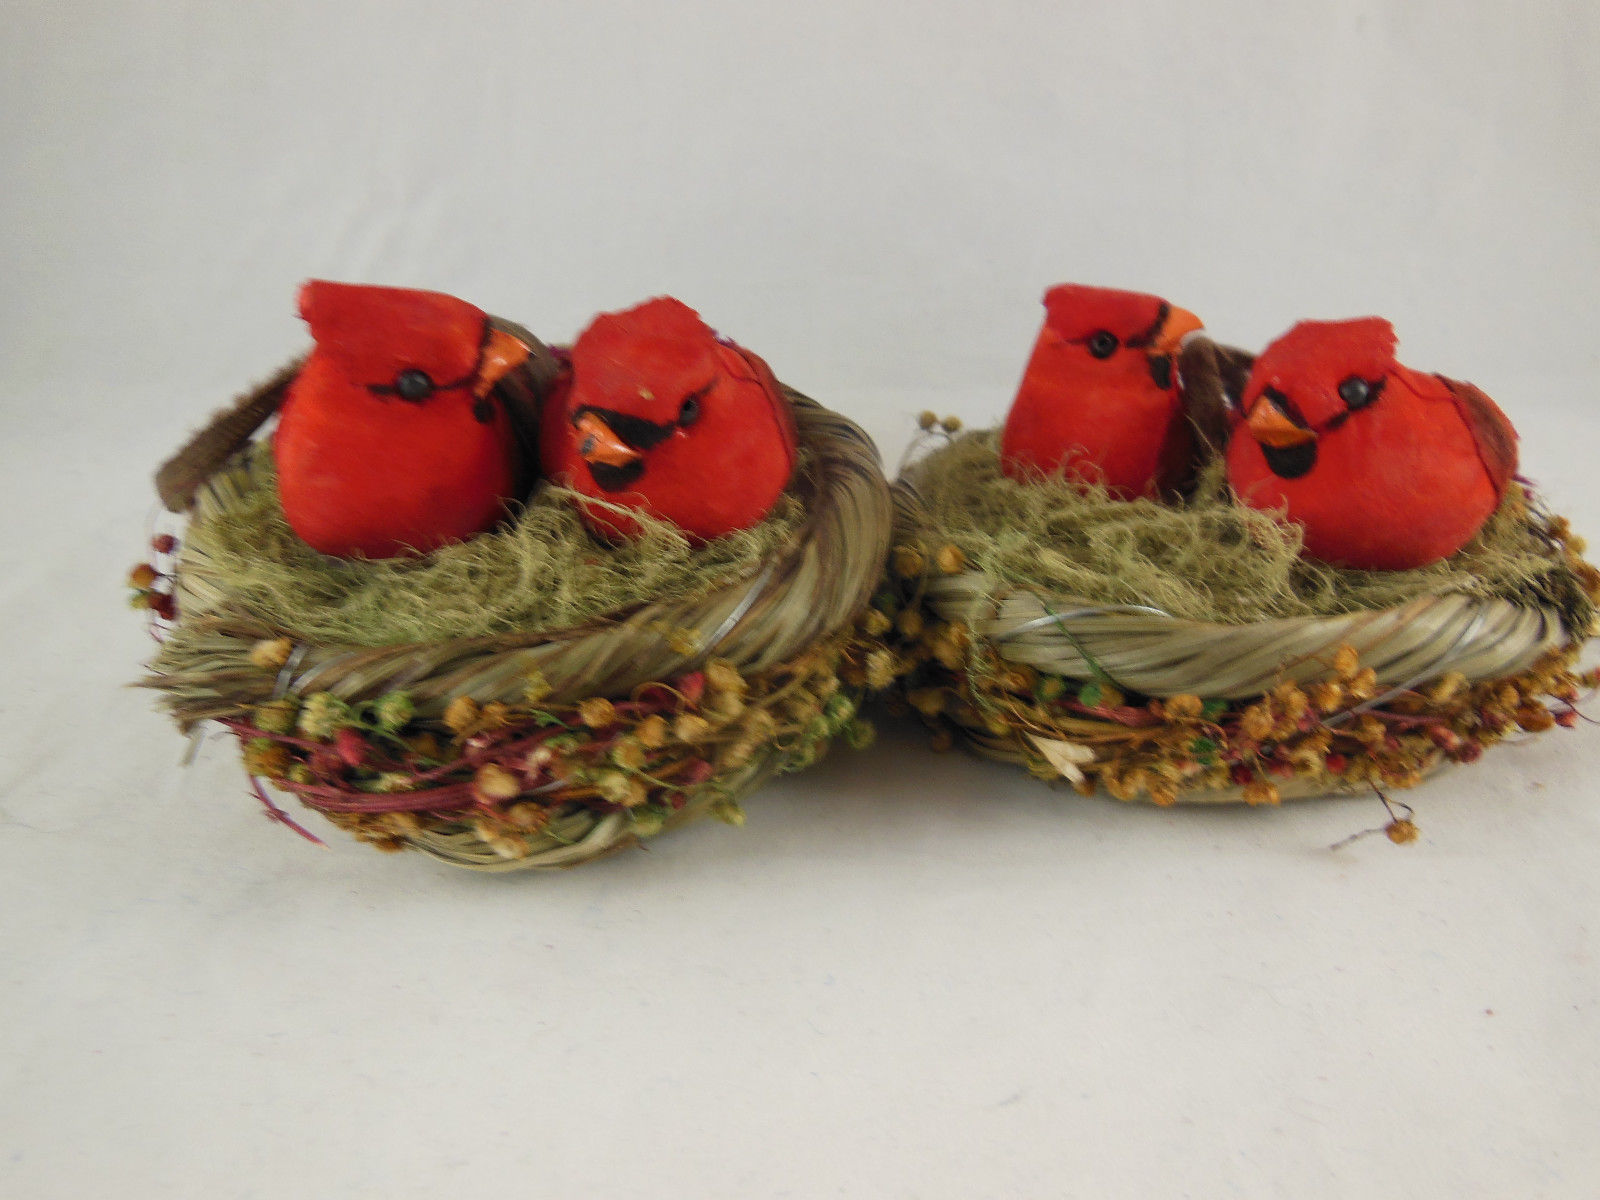 Christmas Nesting Cardinals in Great Condition Ornaments 4" wide Woodsy style - $10.88